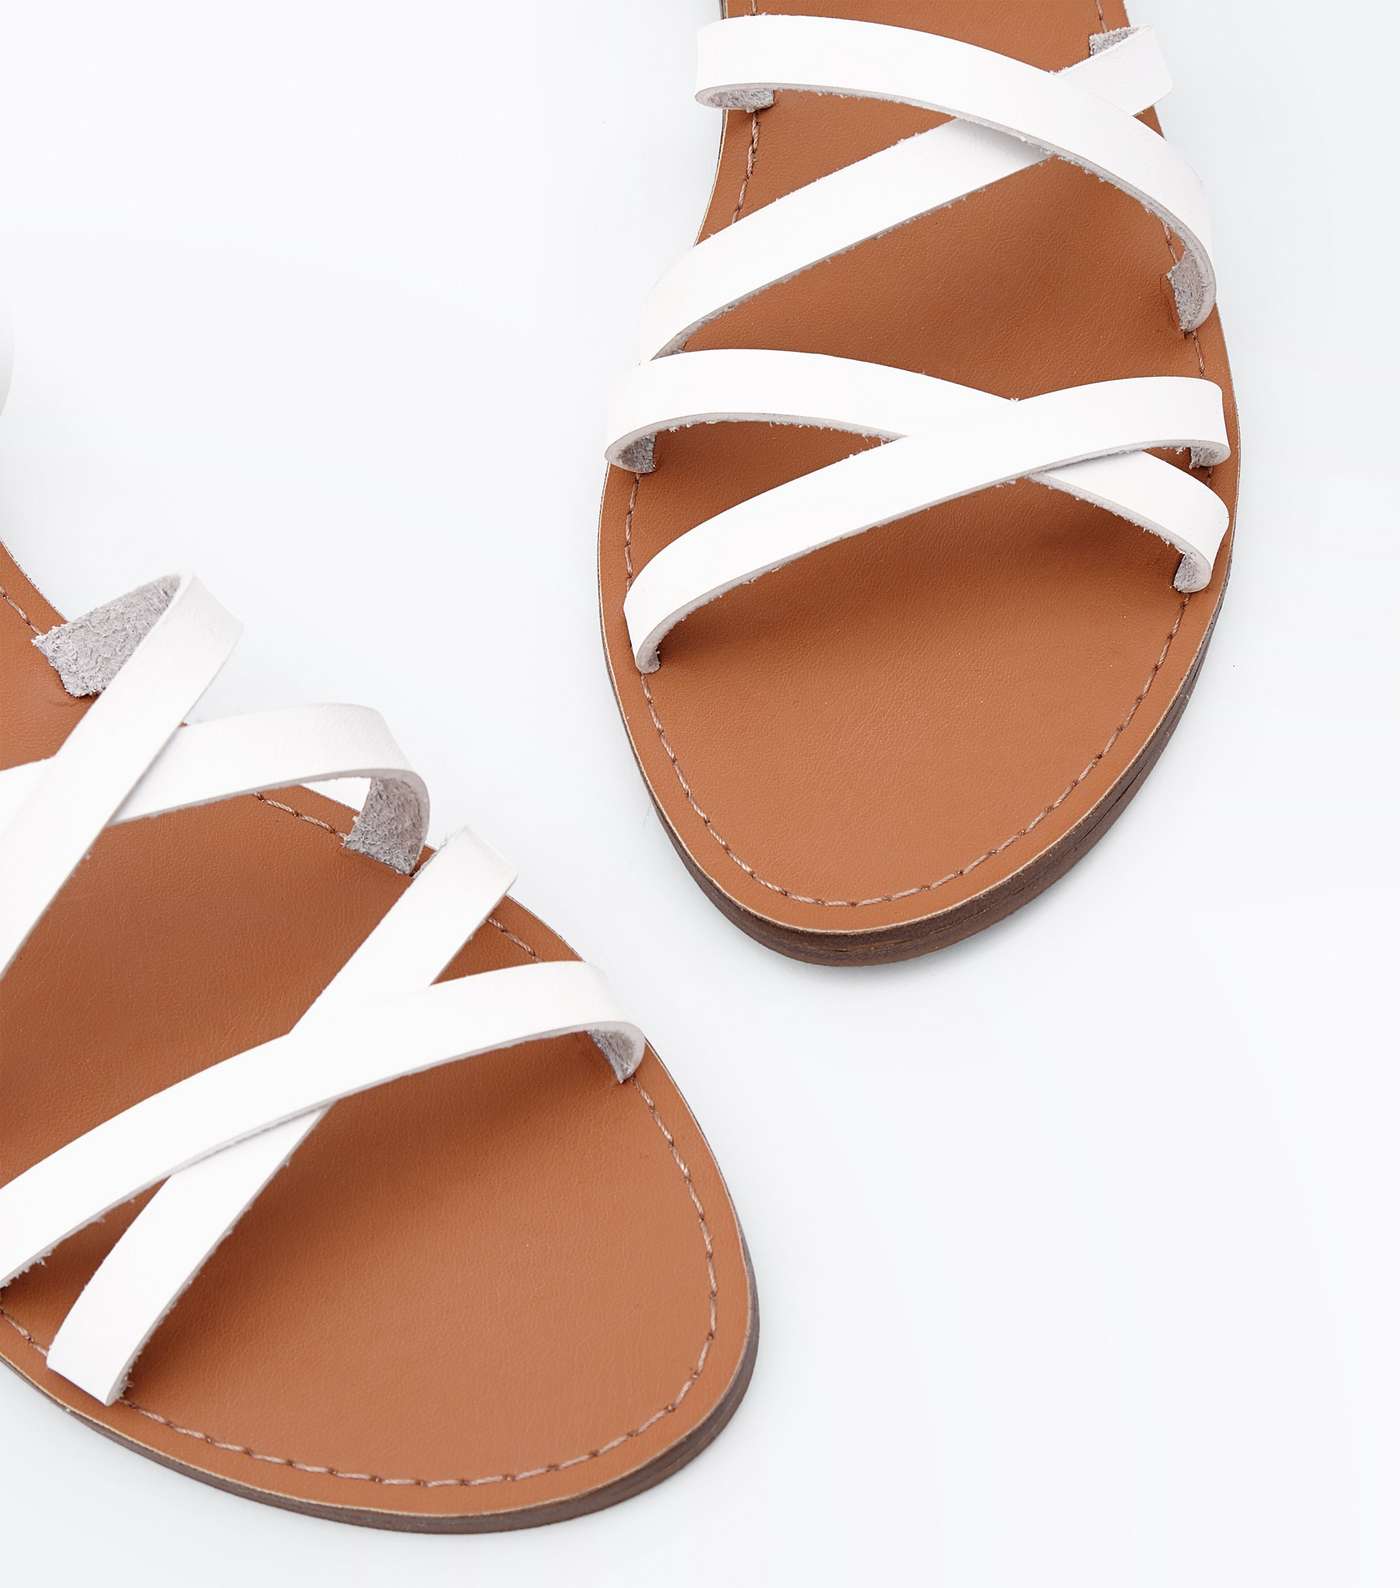 White Leather-Look Strappy Gladiator Flat Sandals Image 3